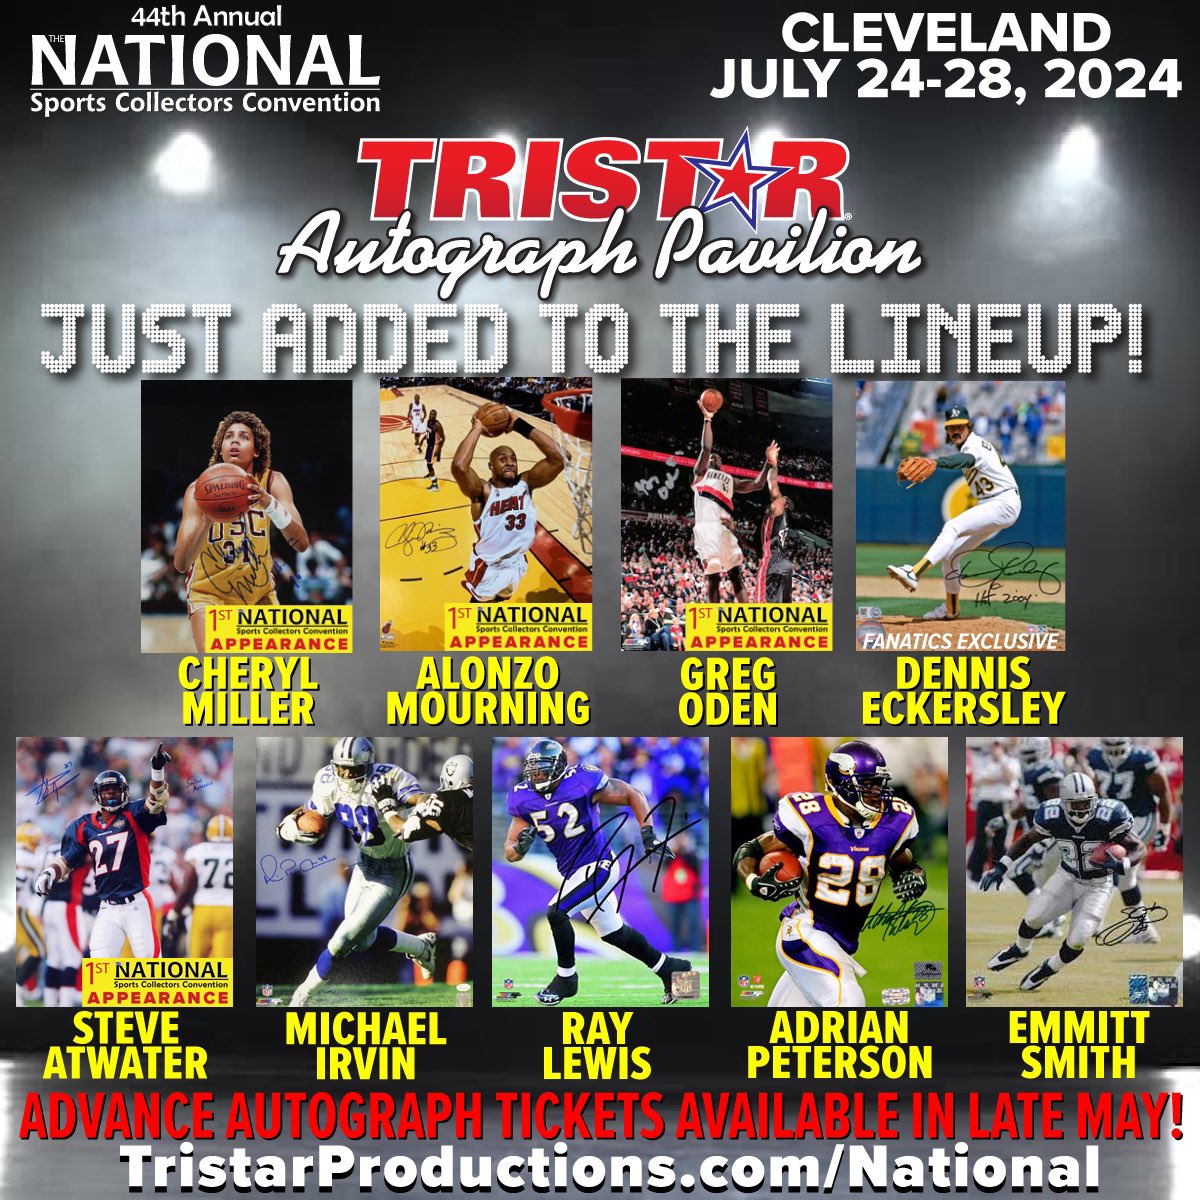 🚨 Special Announcement!   9️⃣ Celebrities Added to the TRISTAR Autograph Pavilion Lineup at the 44th National Sports Collectors Convention (July 24-28 at the I-X Center in Cleveland)! Advance autograph tickets available in late May! tristarproductions.com/National/